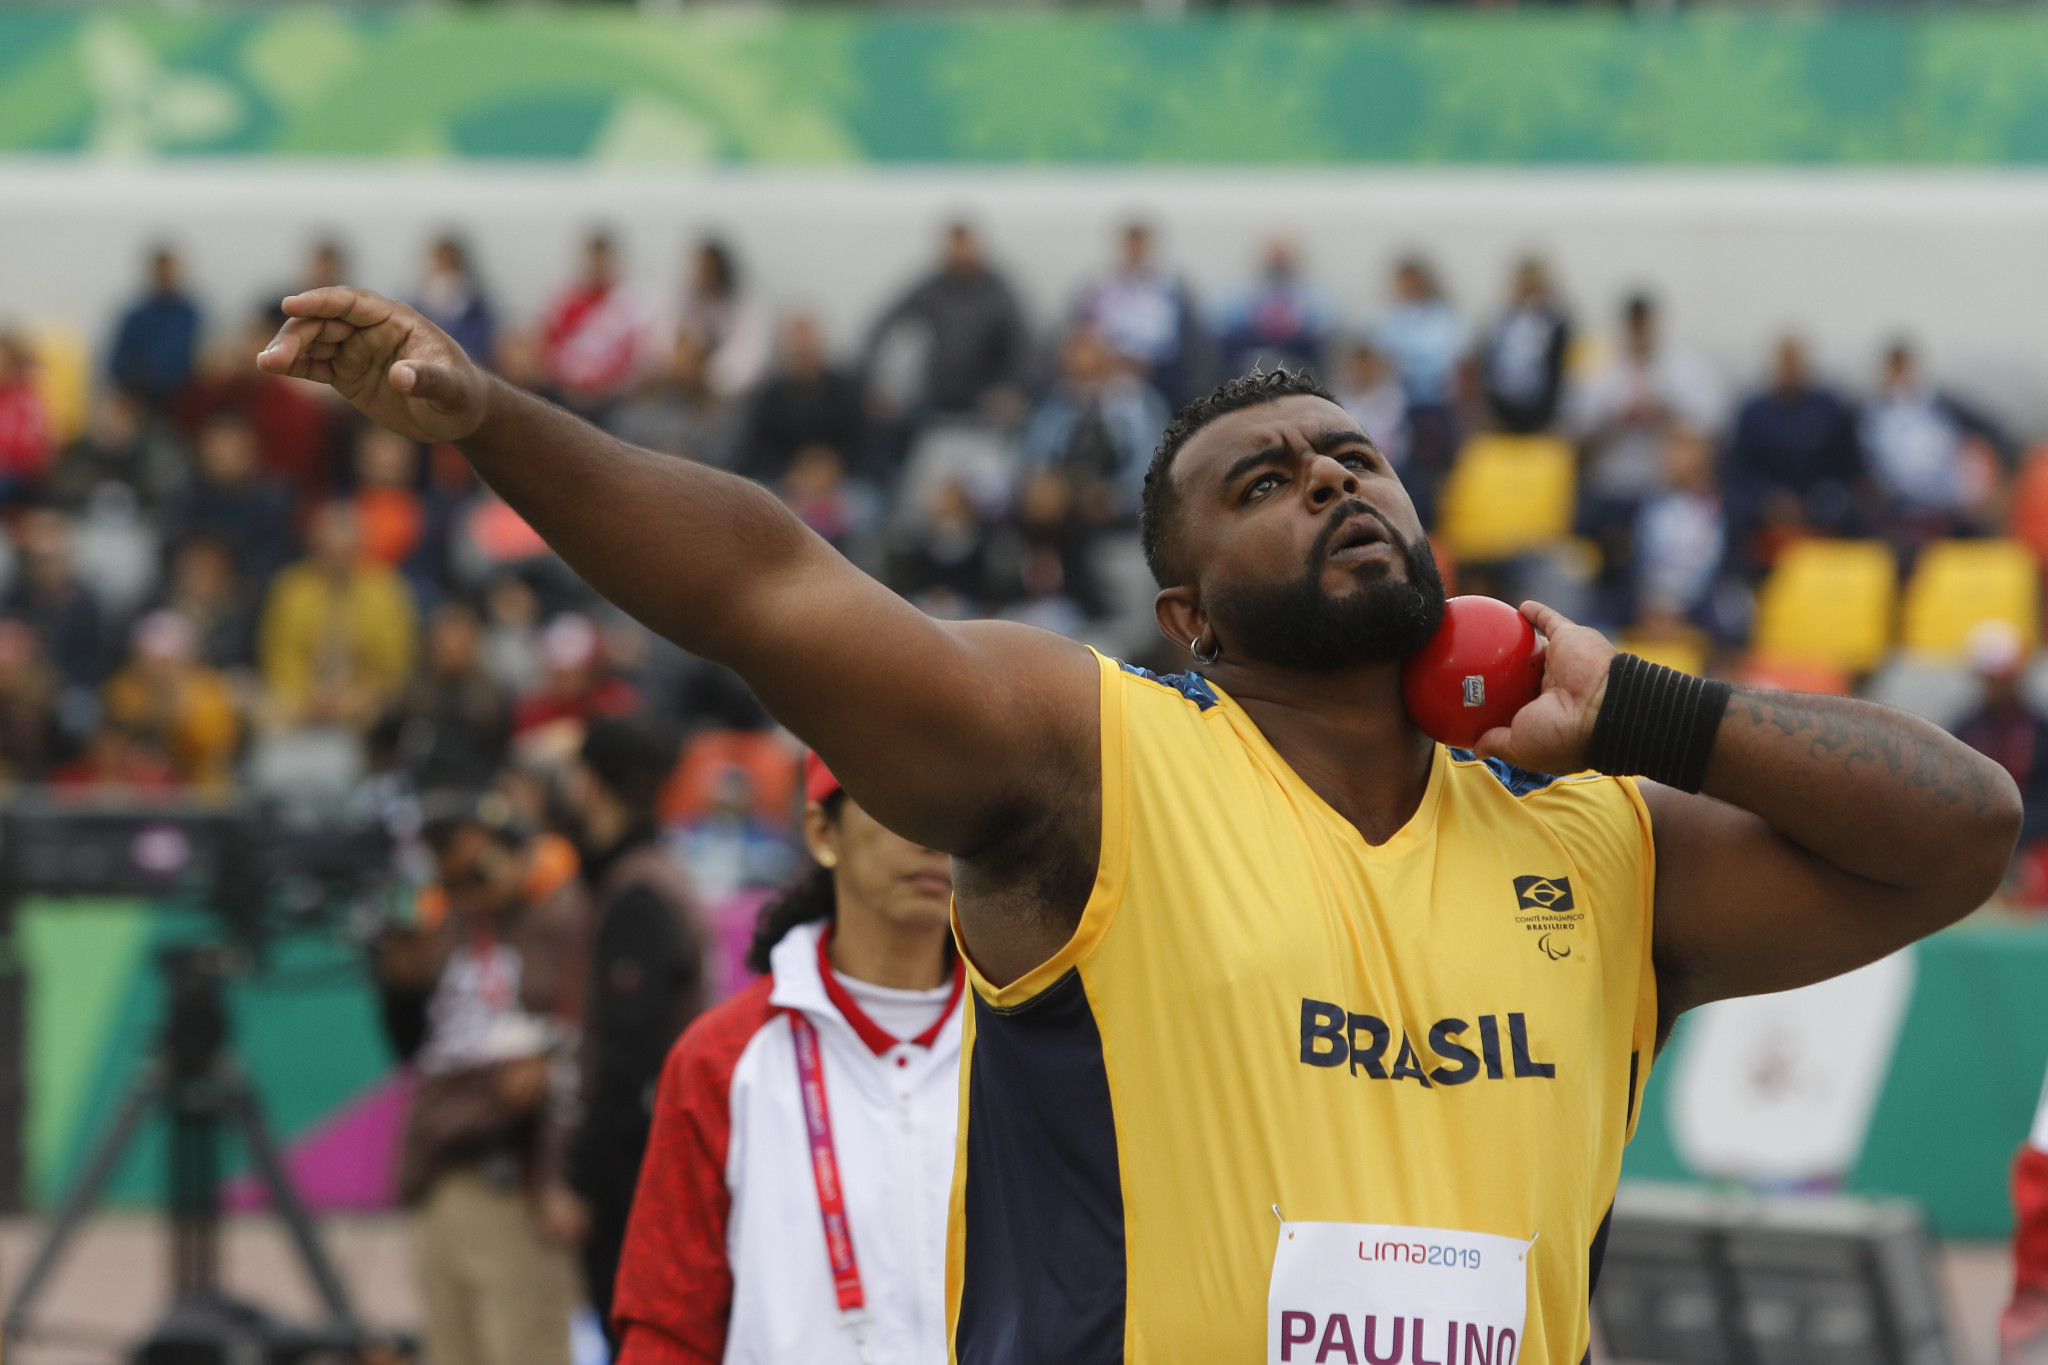 Brazil enjoyed success in athletics at the Lima 2019 Parapan American Games ©Lima 2019